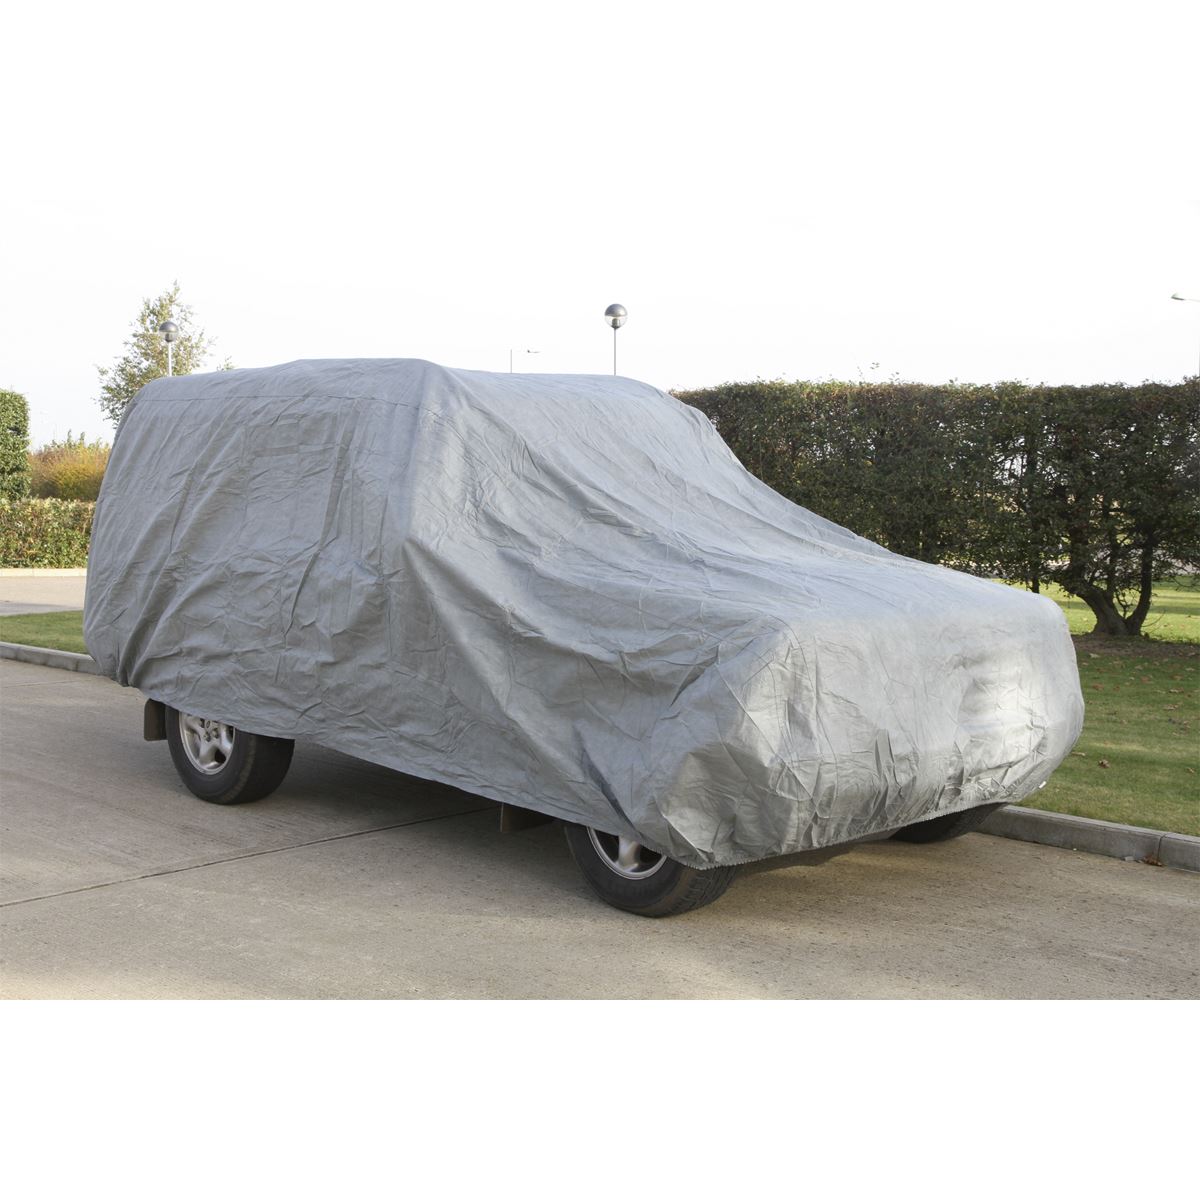 Sealey Premier All-Seasons Car Cover 3-Layer - Extra-Large